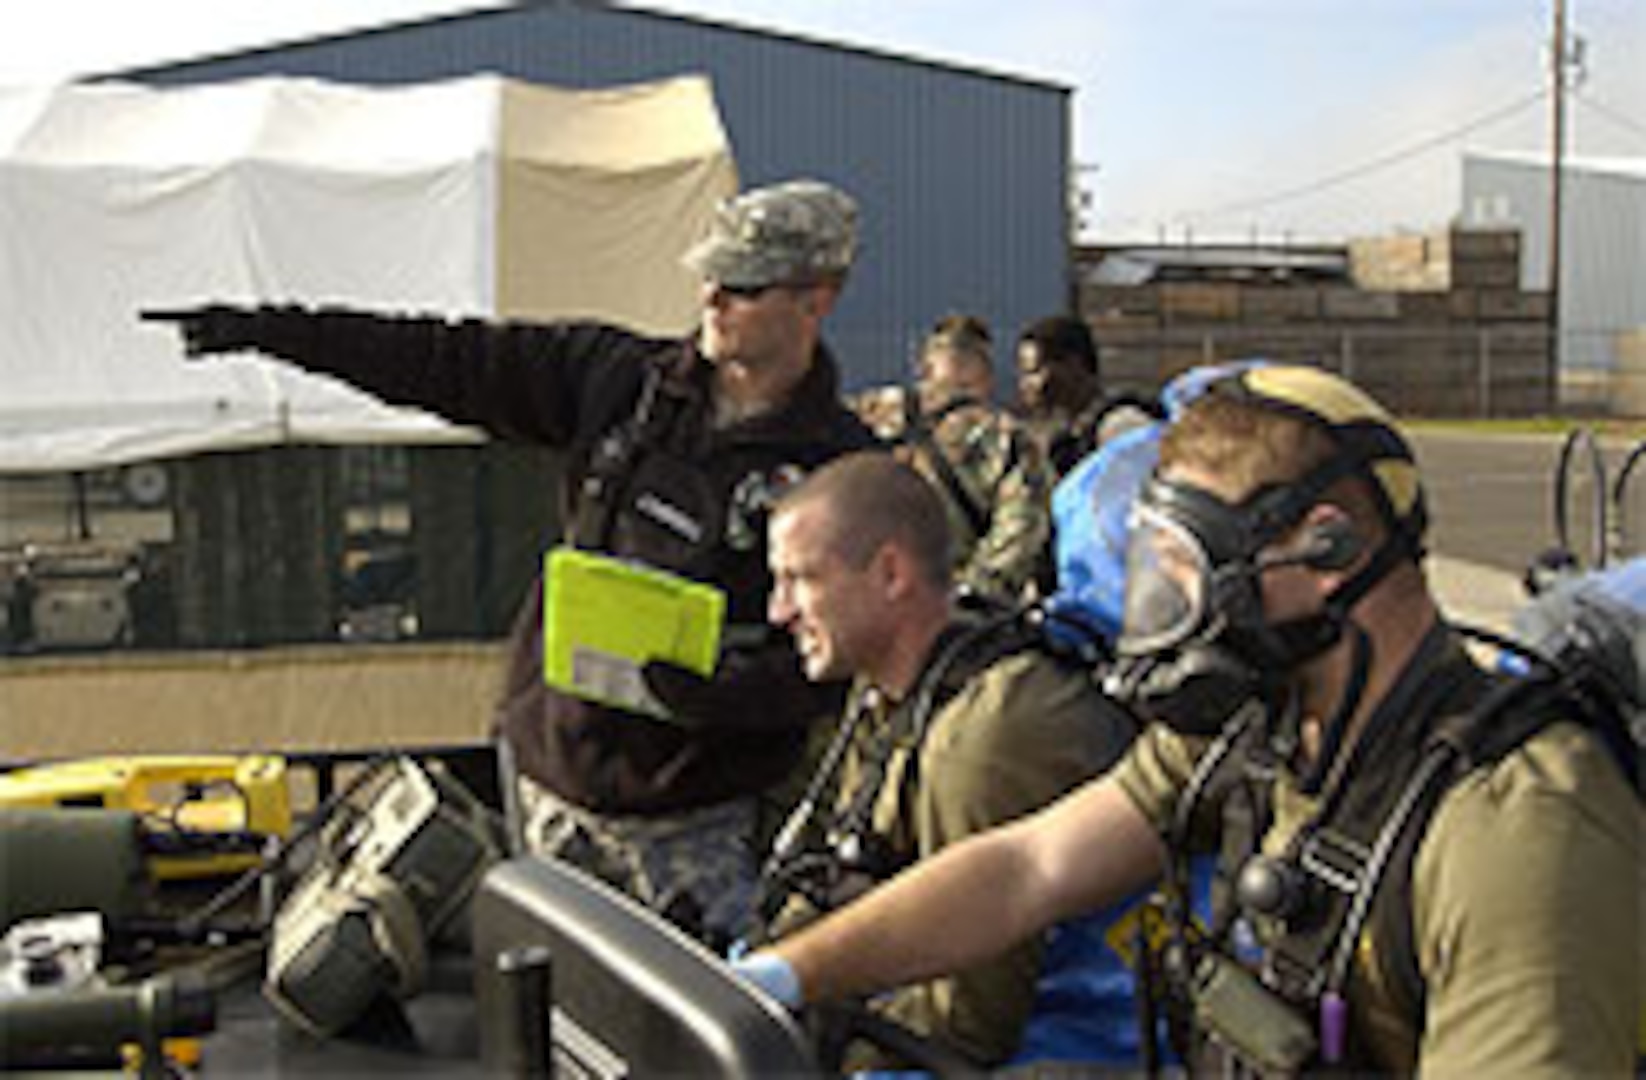 Sgt. Chris Campbell, (left), of the 102nd Civil Support Team, briefs Sgt. Richard Hosmer (center), and Sgt. Paul Edgerly (right), both CST Survey Team Members, at a CST demonstration event at the Marion County Regional Fire Training Facility in Brooks, Ore., on Oct. 27, 2006. Staff Sgt. John Reyes, Survey Team Chief & Sgt 1st Class Sharon Robertson, Logistics NCO, are in the background.